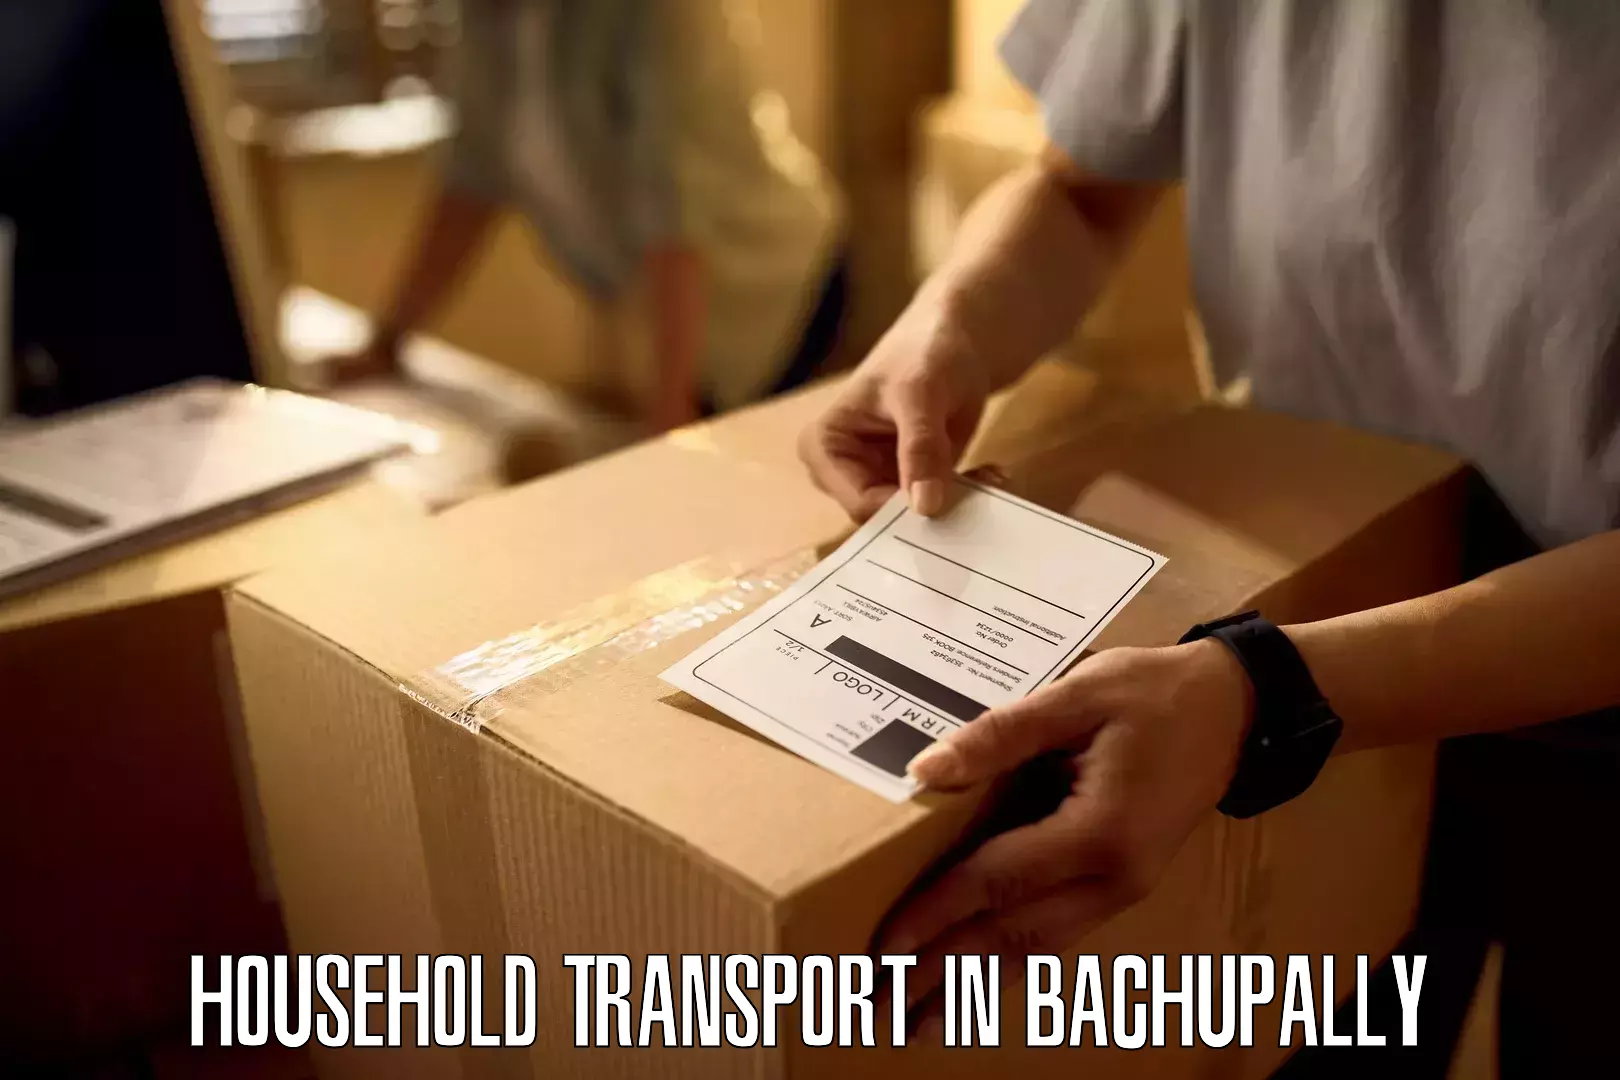 Furniture transport experts in Bachupally